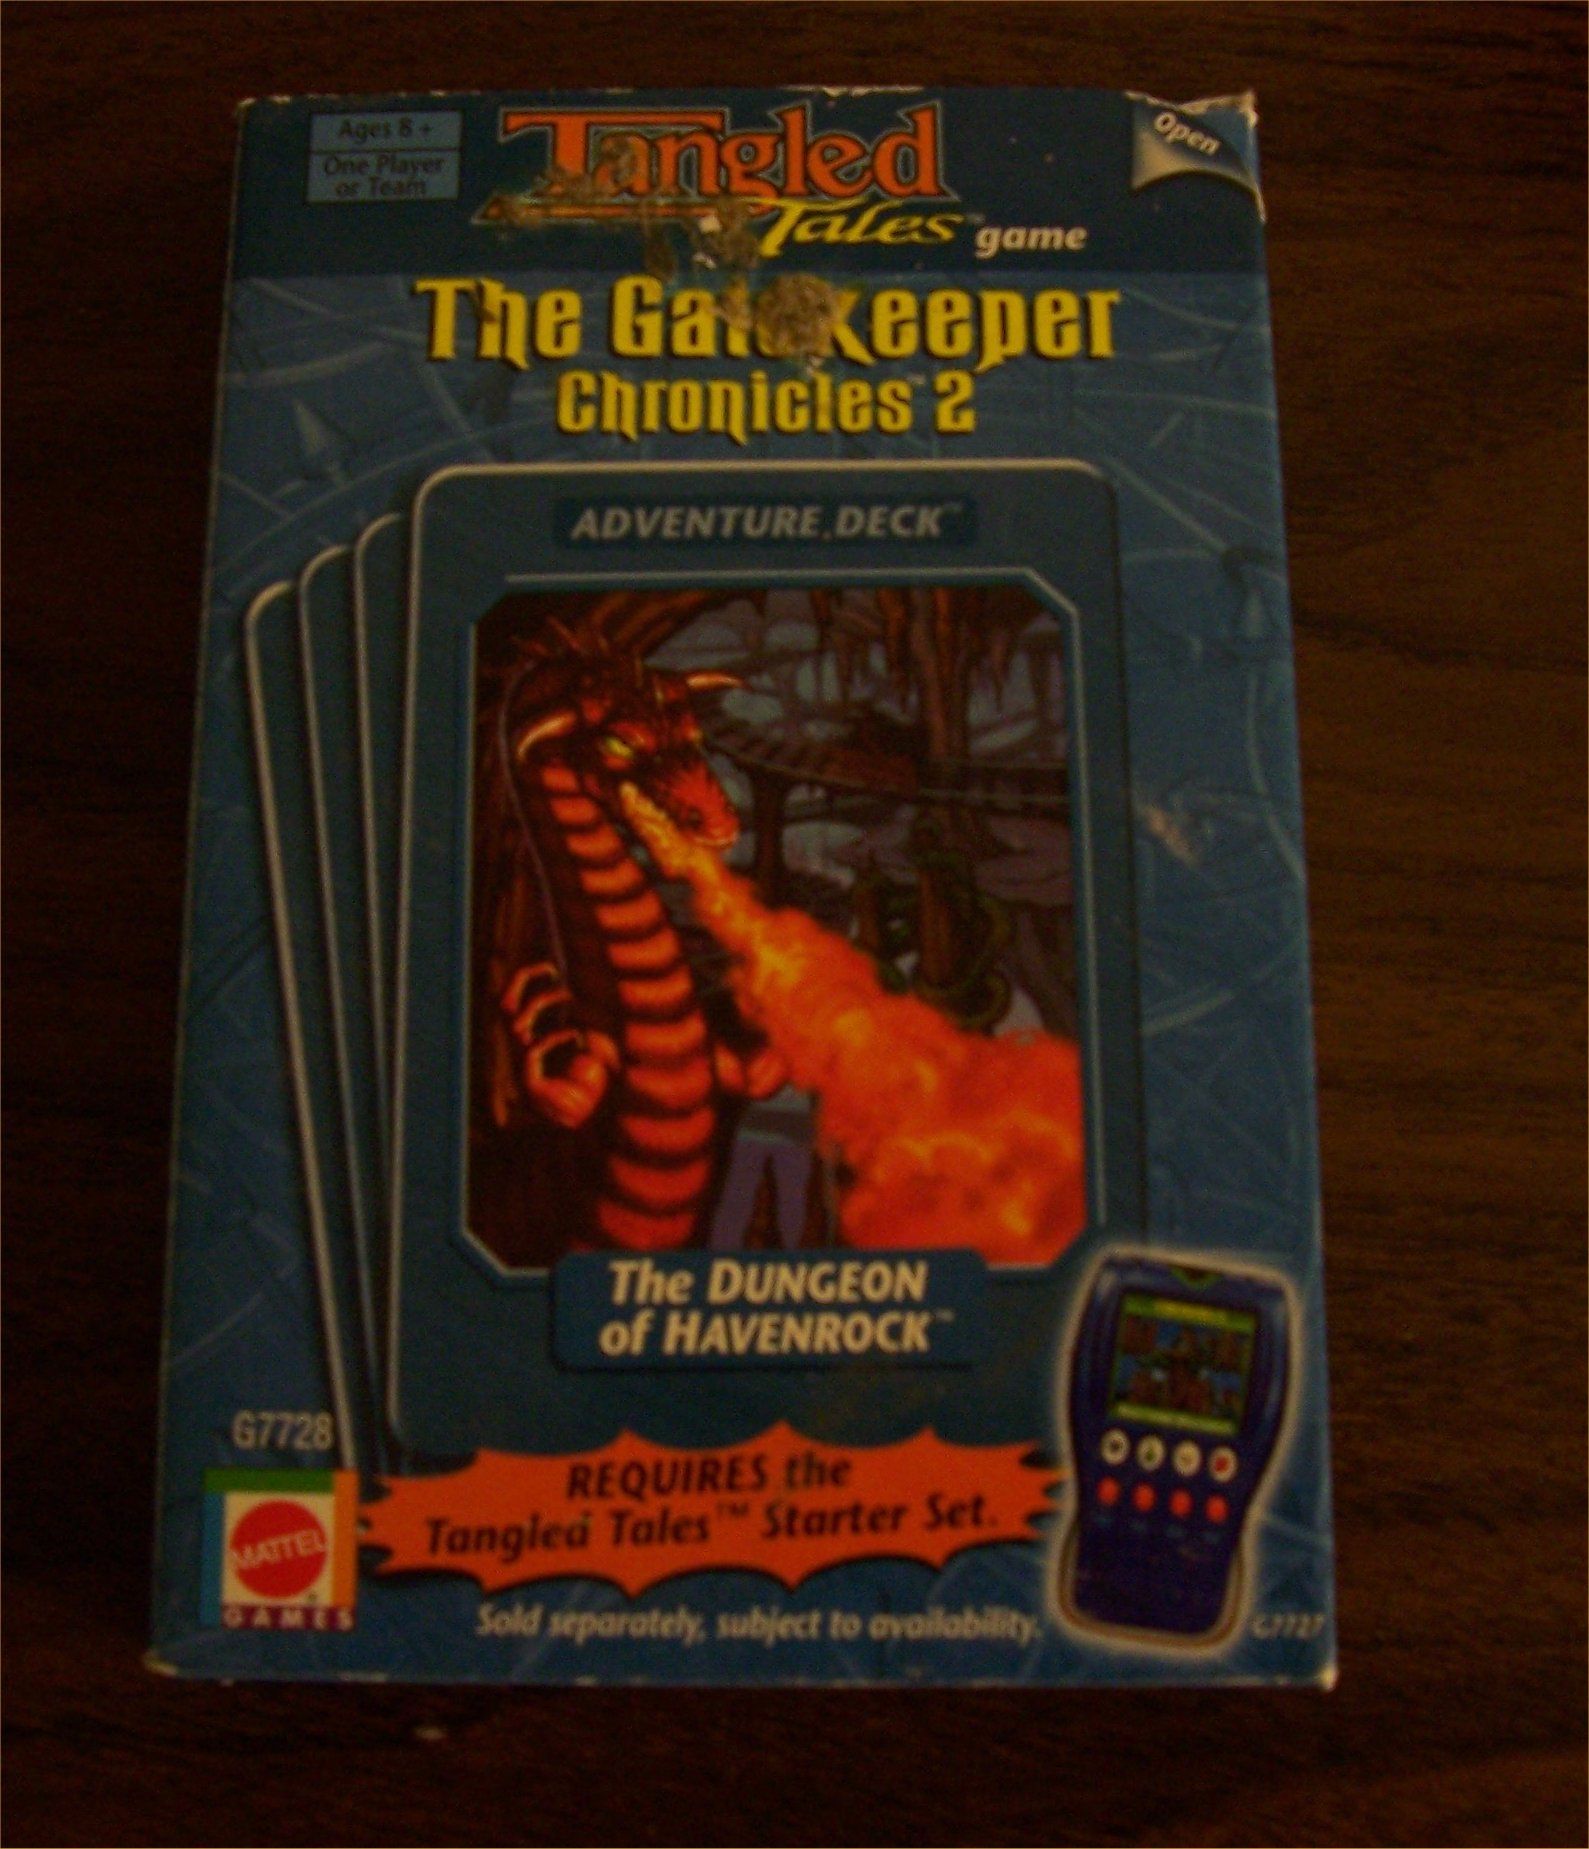 Tangled Tales Booster The Gatekeeper Chronicles 2